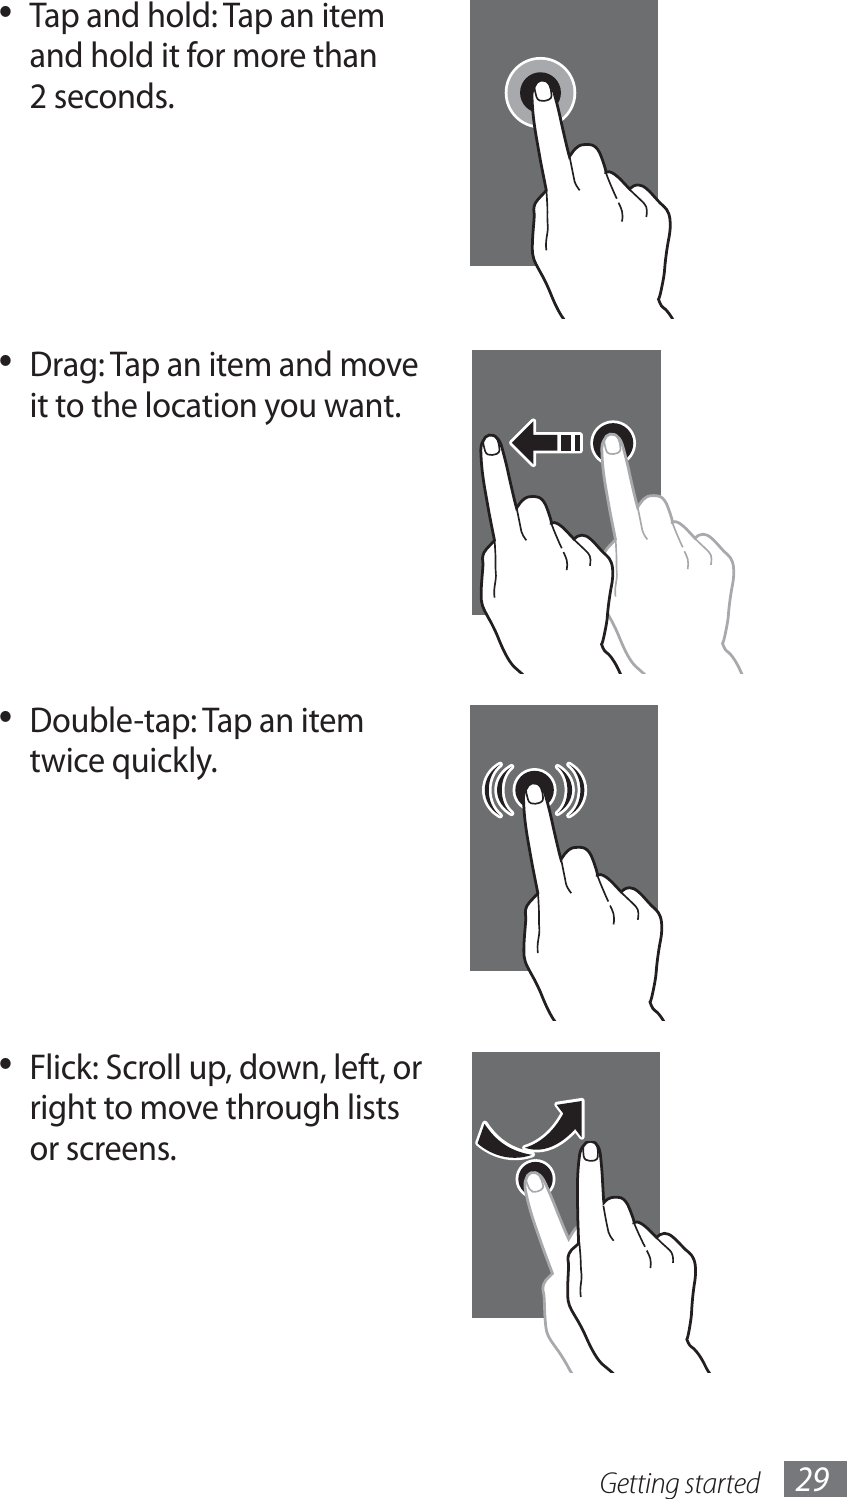 Getting started 29Tap and hold: Tap an item • and hold it for more than 2 seconds.Drag: Tap an item and move • it to the location you want.Double-tap: Tap an item • twice quickly.Flick: Scroll up, down, left, or • right to move through lists or screens.